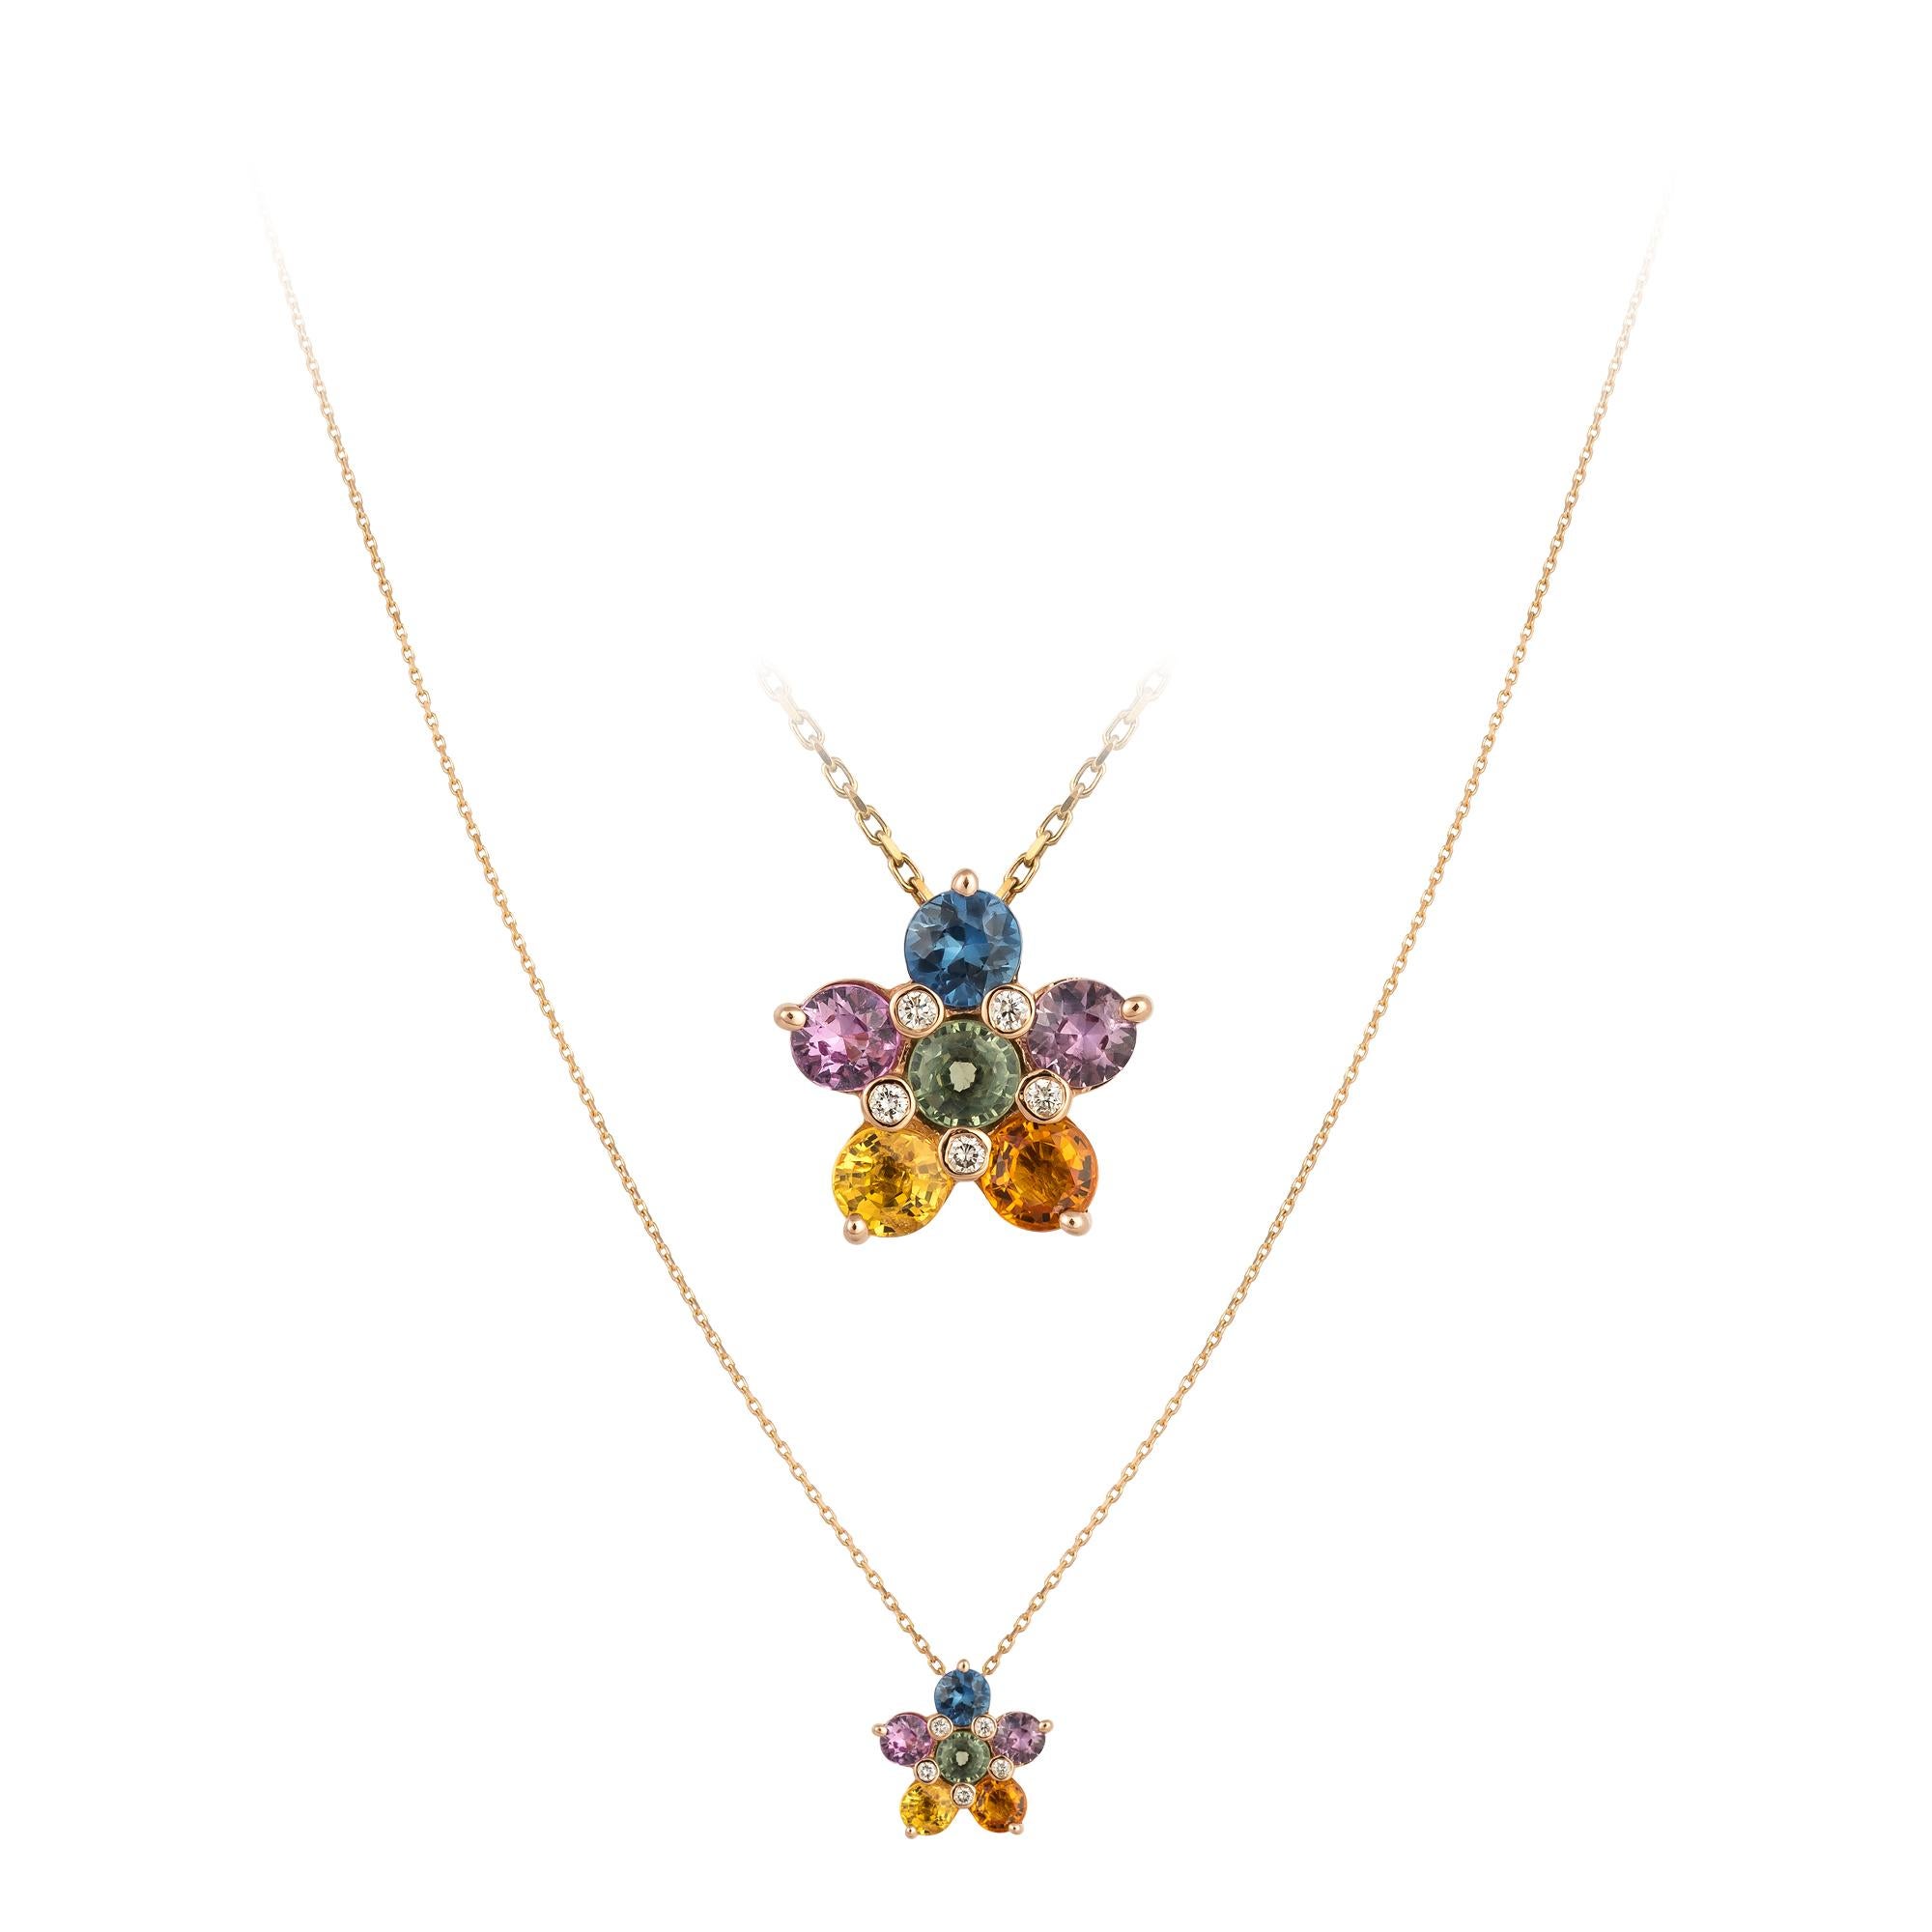 NECKLACE 18K Rose Gold 
Diamond 0.06 Cts/5 Pcs
Multi Sapphire 1.88 Cts/6 Pcs

With a heritage of ancient fine Swiss jewelry traditions, NATKINA is a Geneva based jewellery brand, which creates modern jewellery masterpieces suitable for every day